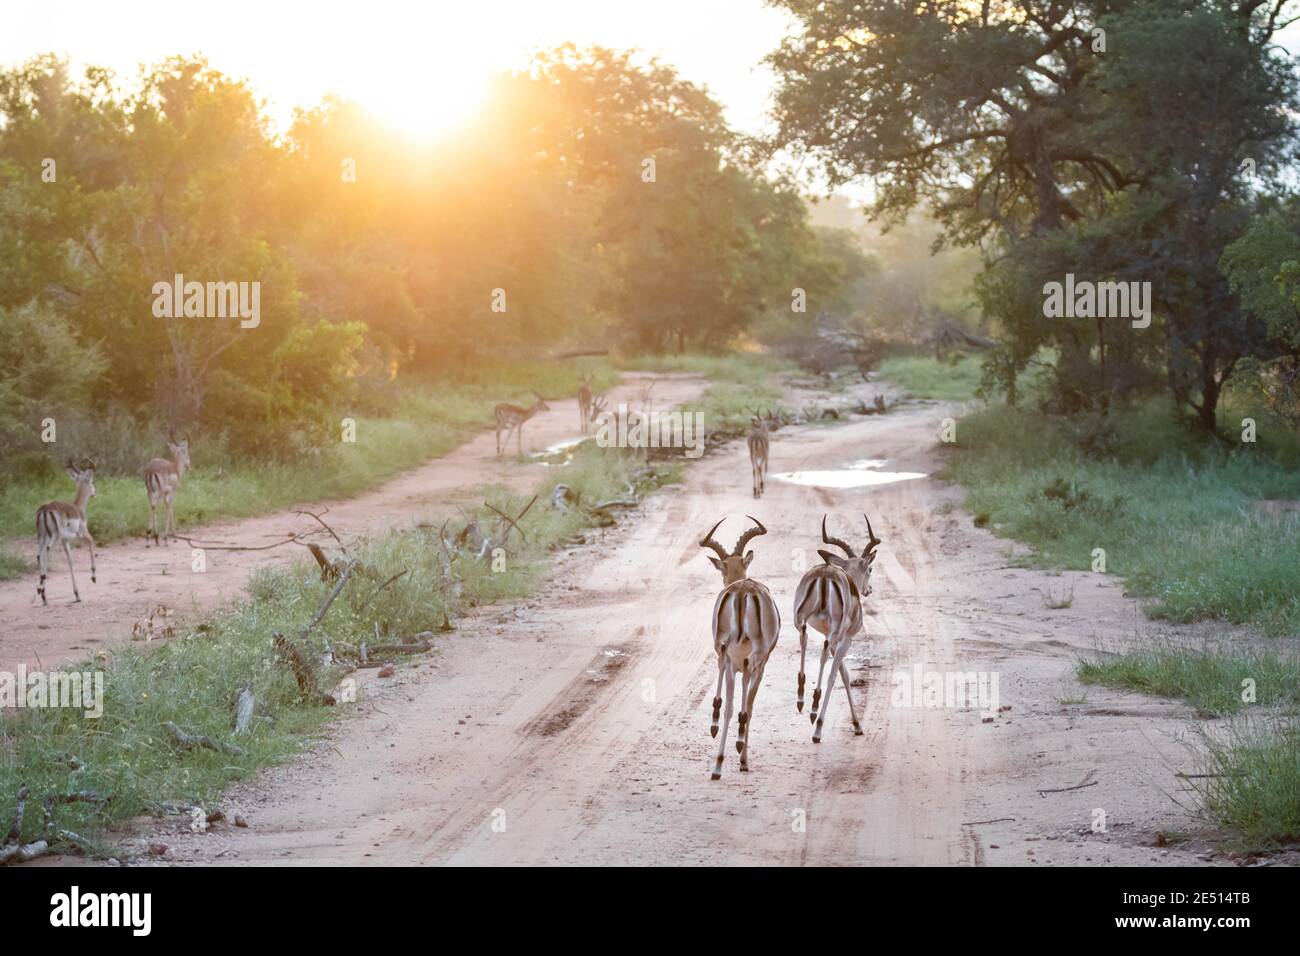 A herd of impalas running down a dirt track among trees in south african savanna at sunset Stock Photo